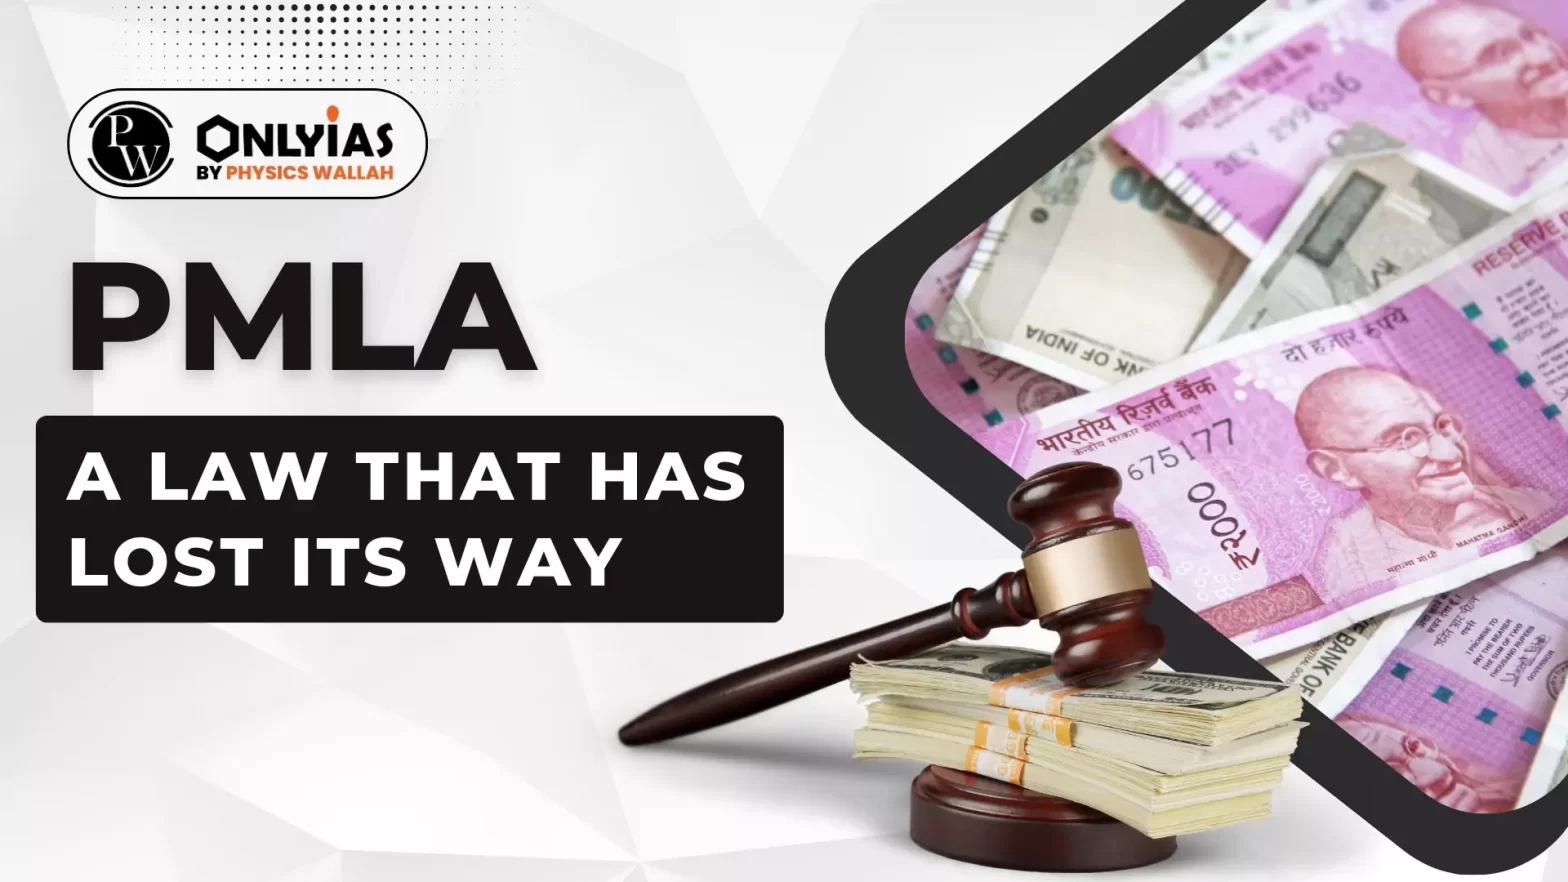 PMLA: A Law that Has Lost Its Way